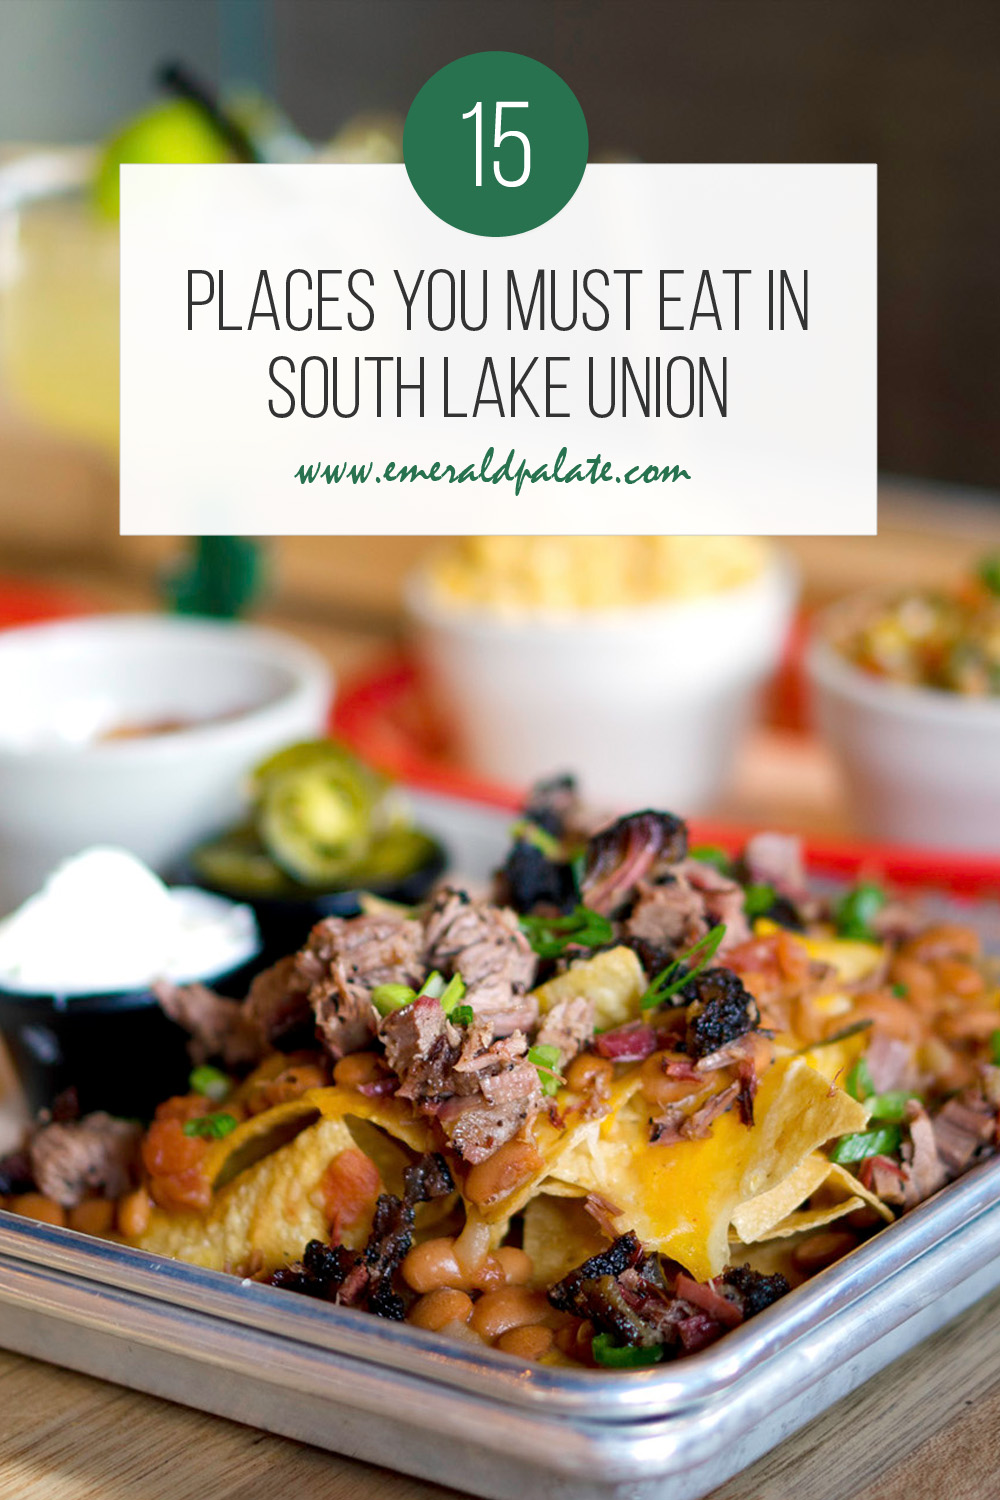 Places you must eat in South Lake Union, a neighborhood in Seattle